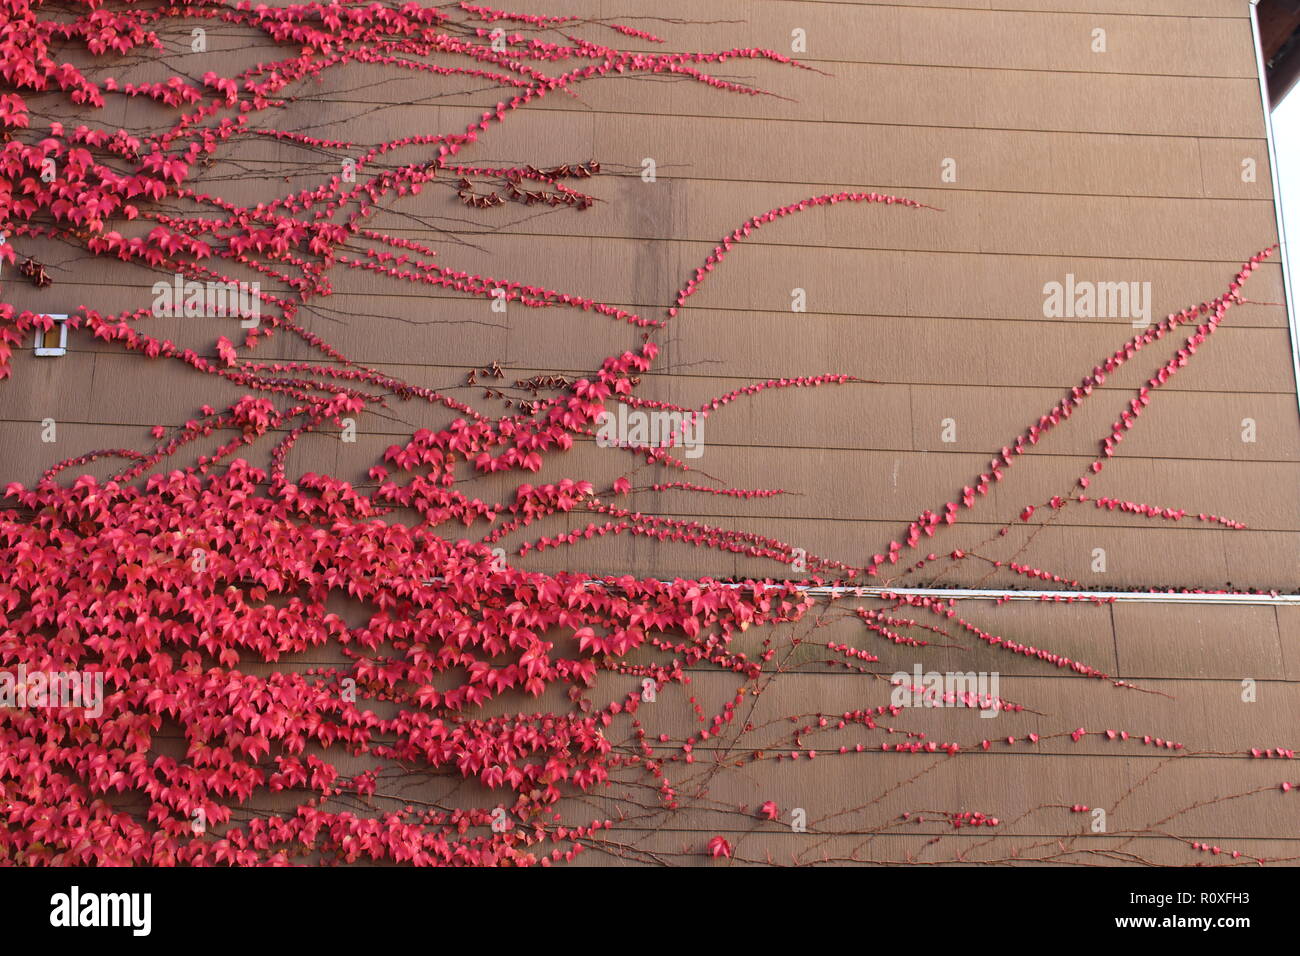 Red vines covering the side of a house Stock Photo